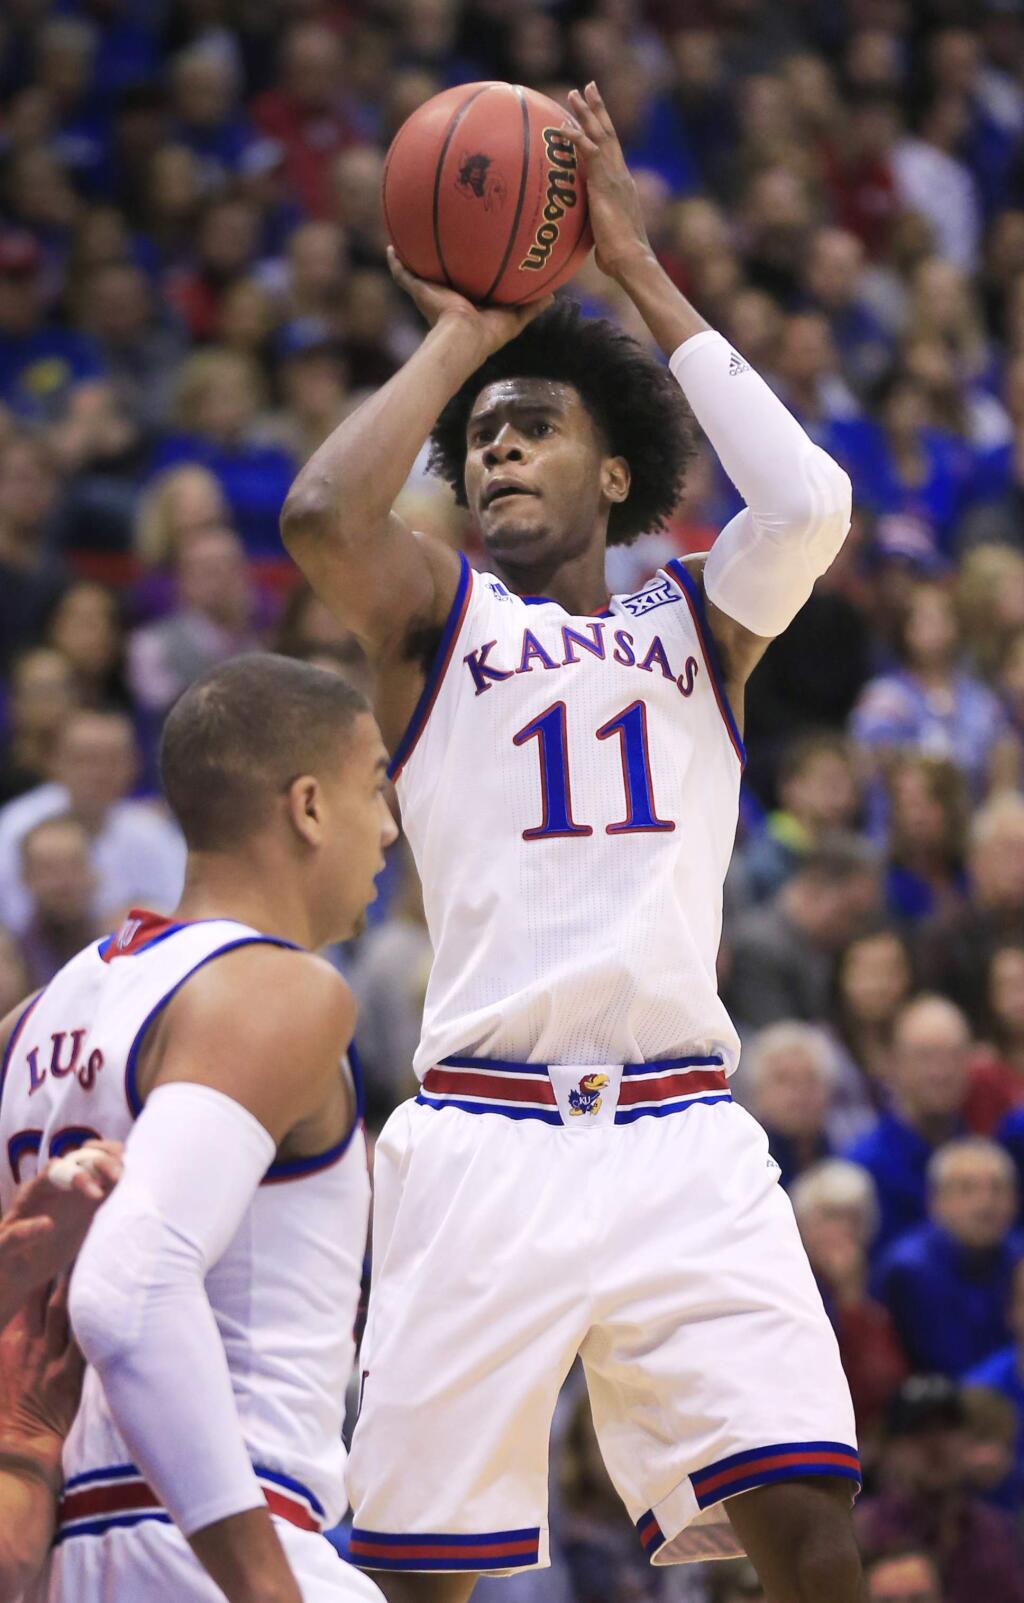 Kansas guard Josh Jackson (11) shoots a basket during the first half of an NCAA college basketball game against Nebraska in Lawrence, Kan., Saturday, Dec. 10, 2016. Jackson scored 17 points in the game. Kansas defeated Nebraska 89-72. (AP Photo/Orlin Wagner)